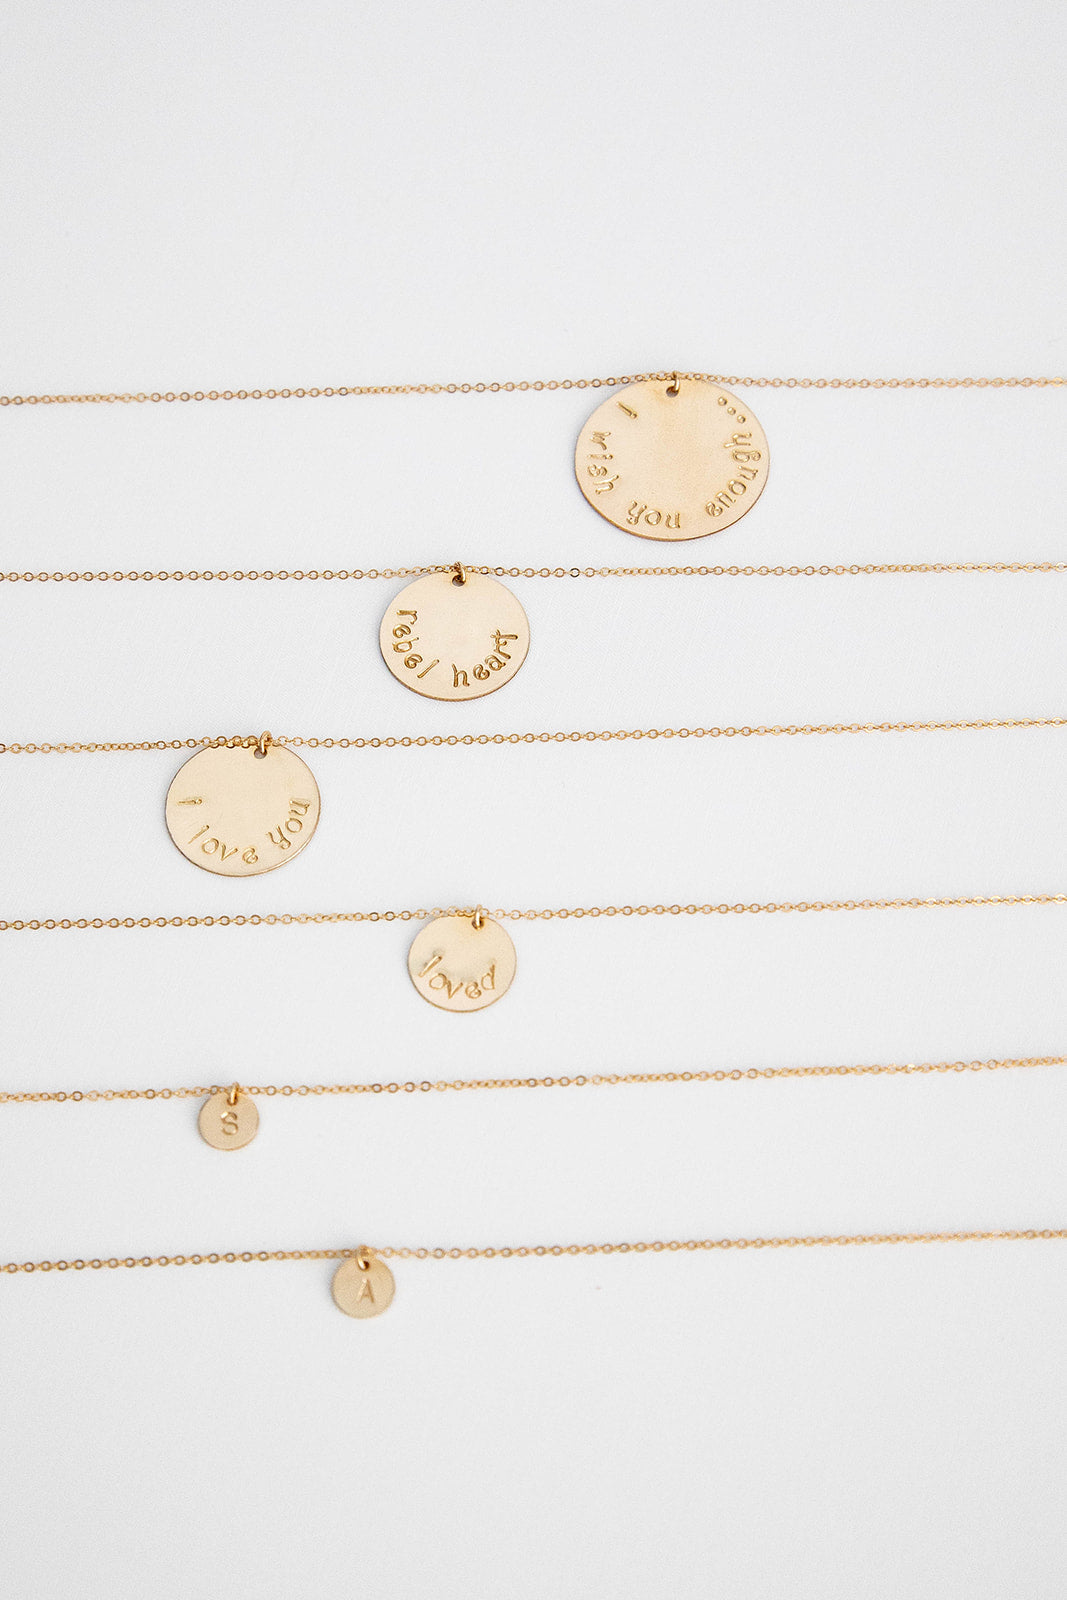 14k gold filled chain necklaces with 14k gold filled hand stamped disc lay on a white background. The discs read "I wish you enough", "rebel heart", "I love you", "loved", "S", and "A".